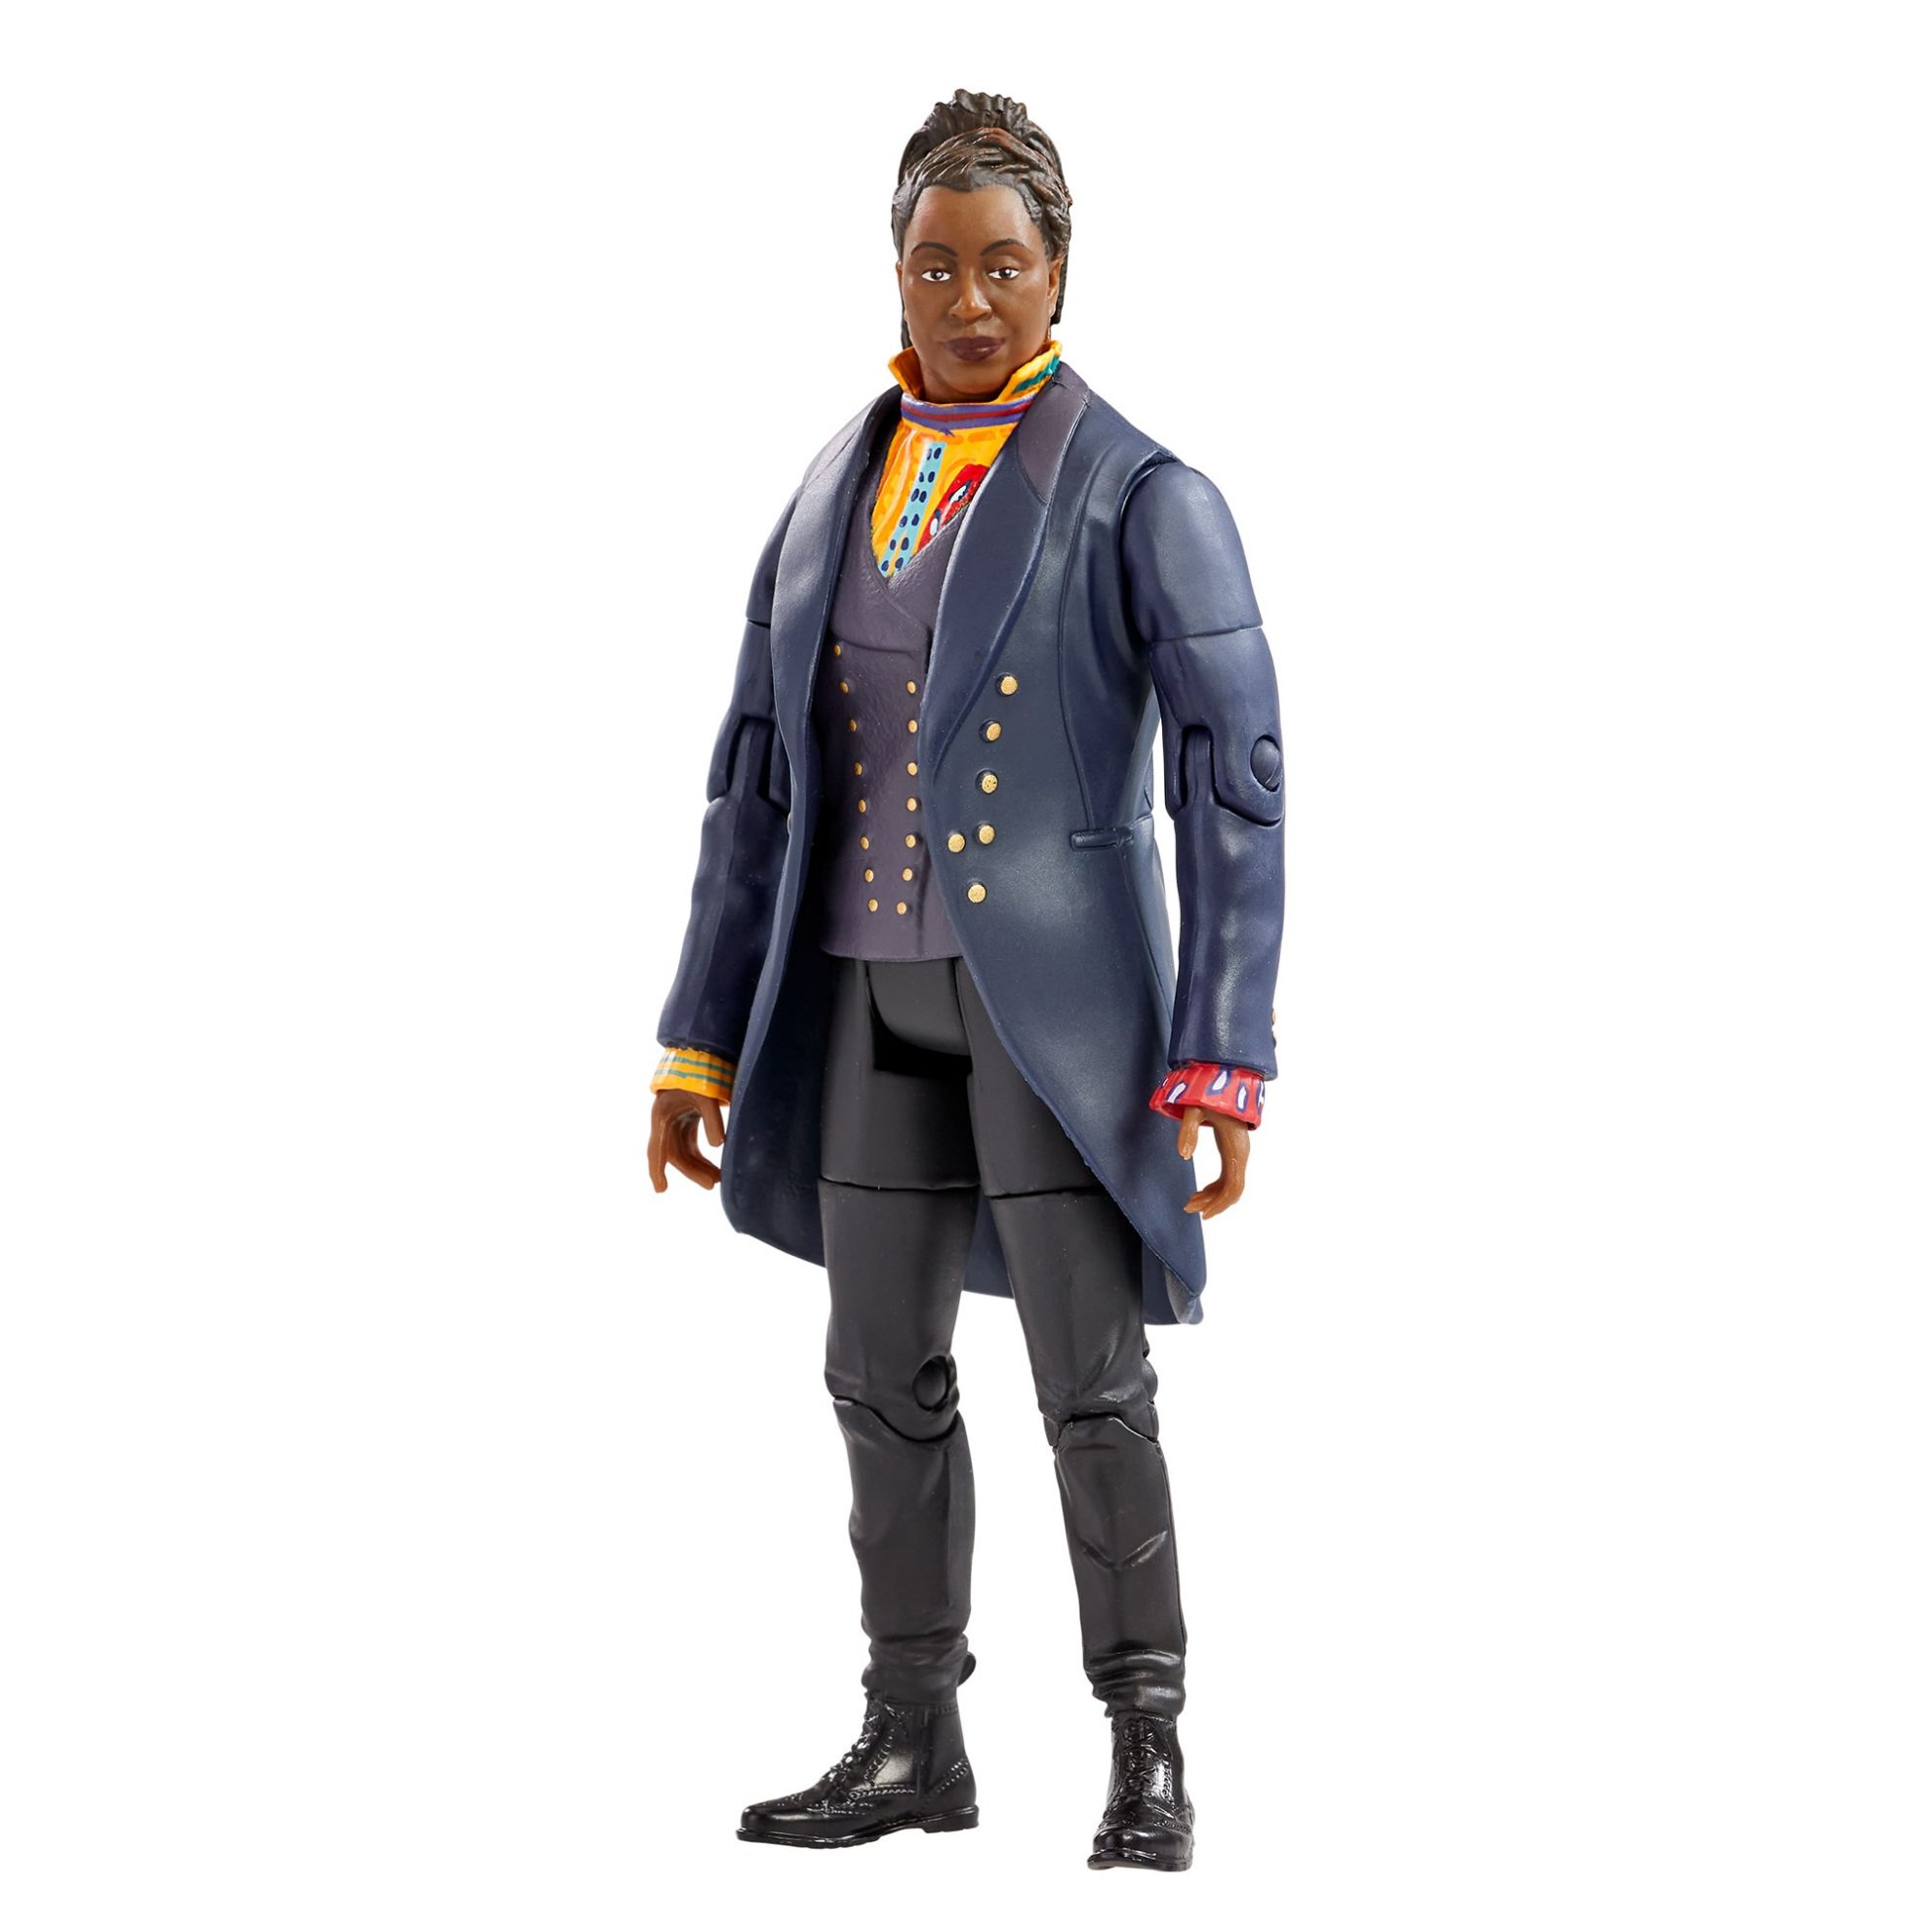 Doctor Who Fugitive Doctor and Tardis Collector Figure Set